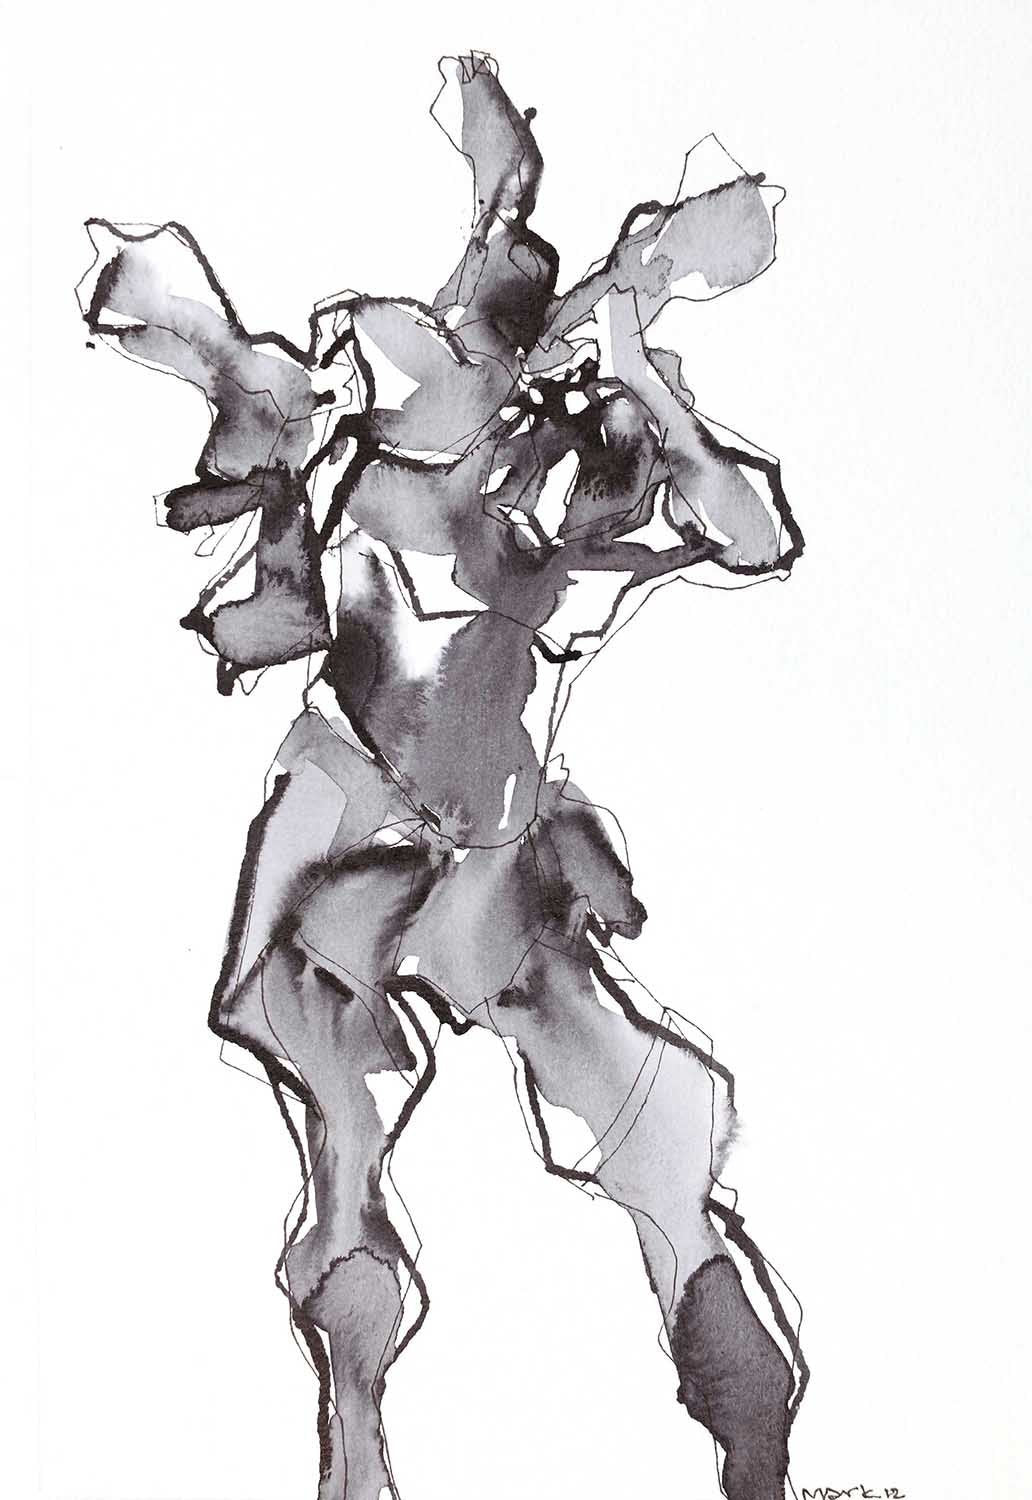 Performer 172|S. Mark Rathinaraj- Pen and Ink on Paper, , 8.5 x 5.5 inches